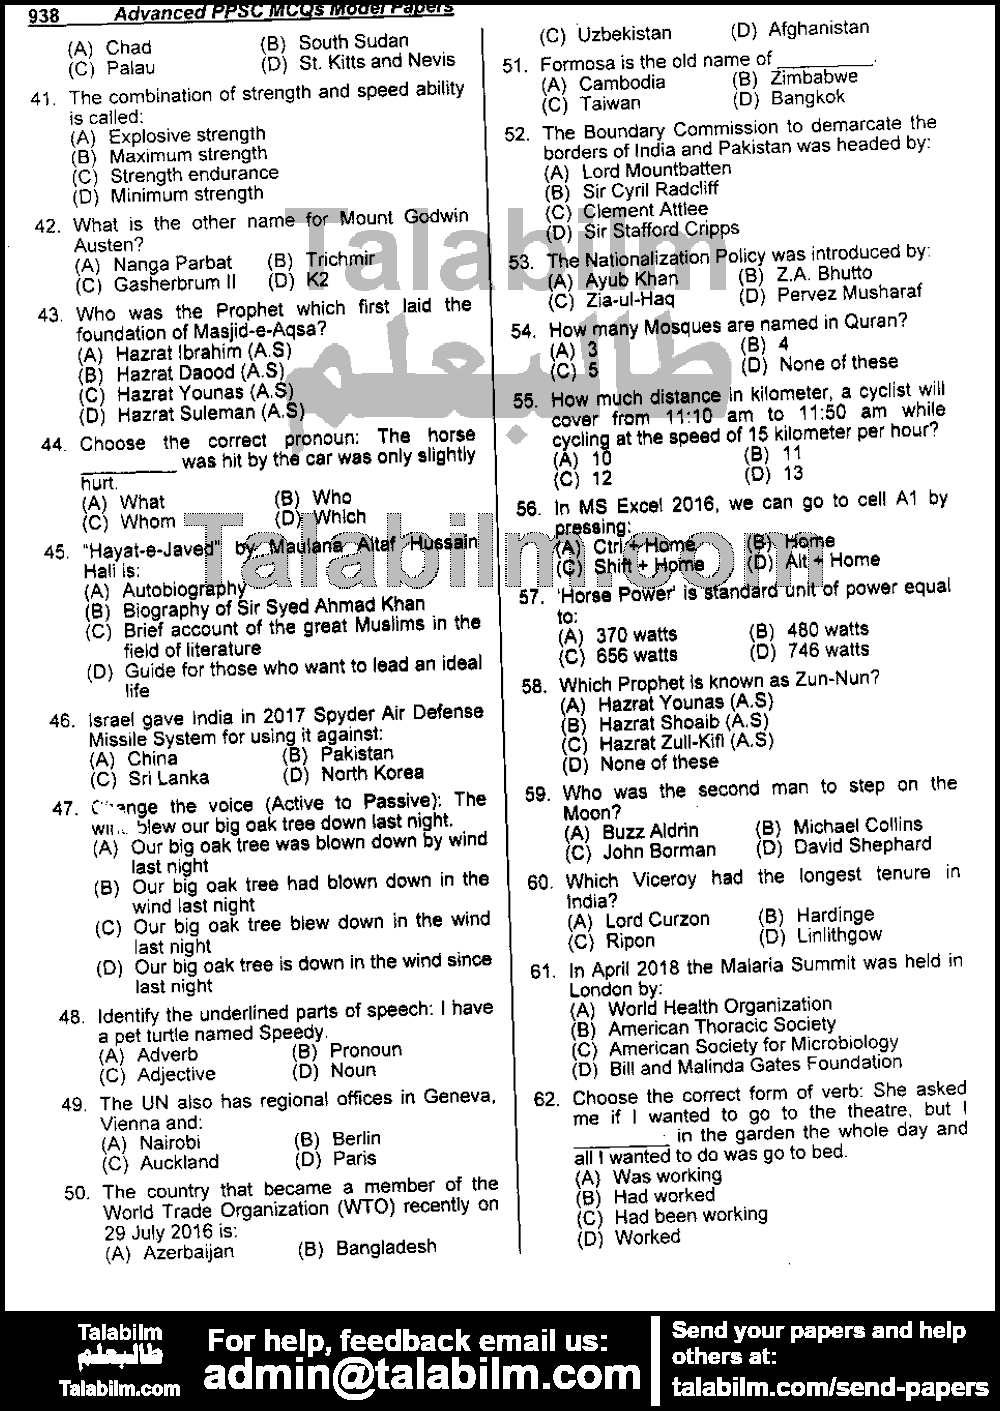 General Elementary School Educator 0 past paper for 2019 Evening Paper Page No. 3